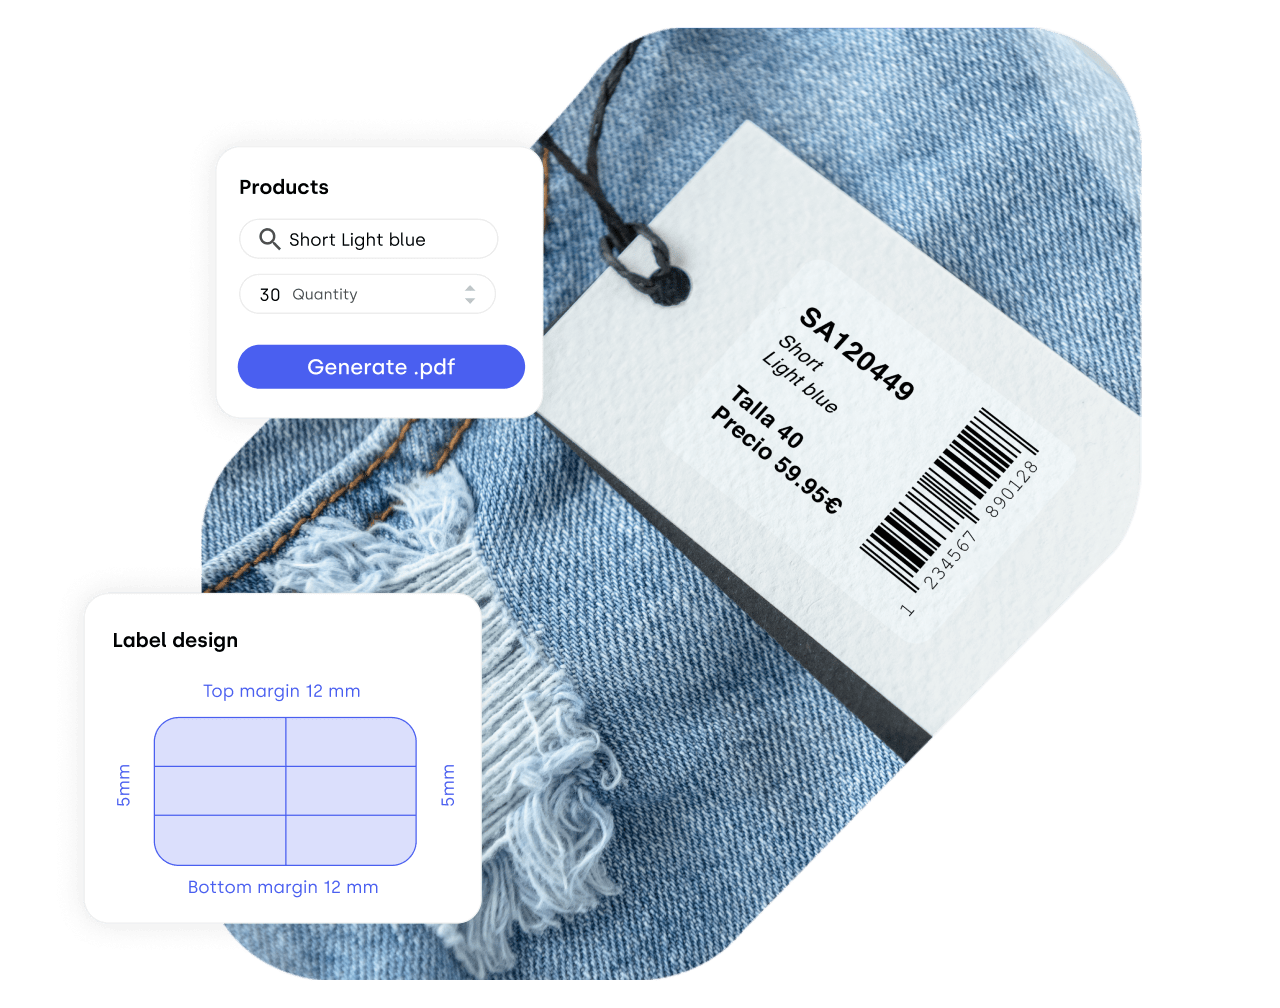 An image of a denim garment with a close-up of a customizable product label generated by Stockagile SaaS. The label contains the product name, size, and price with a barcode. Interface elements include a 'Products' search bar, quantity selector, PDF generation button, and a 'Label design' diagram with margin specifications.